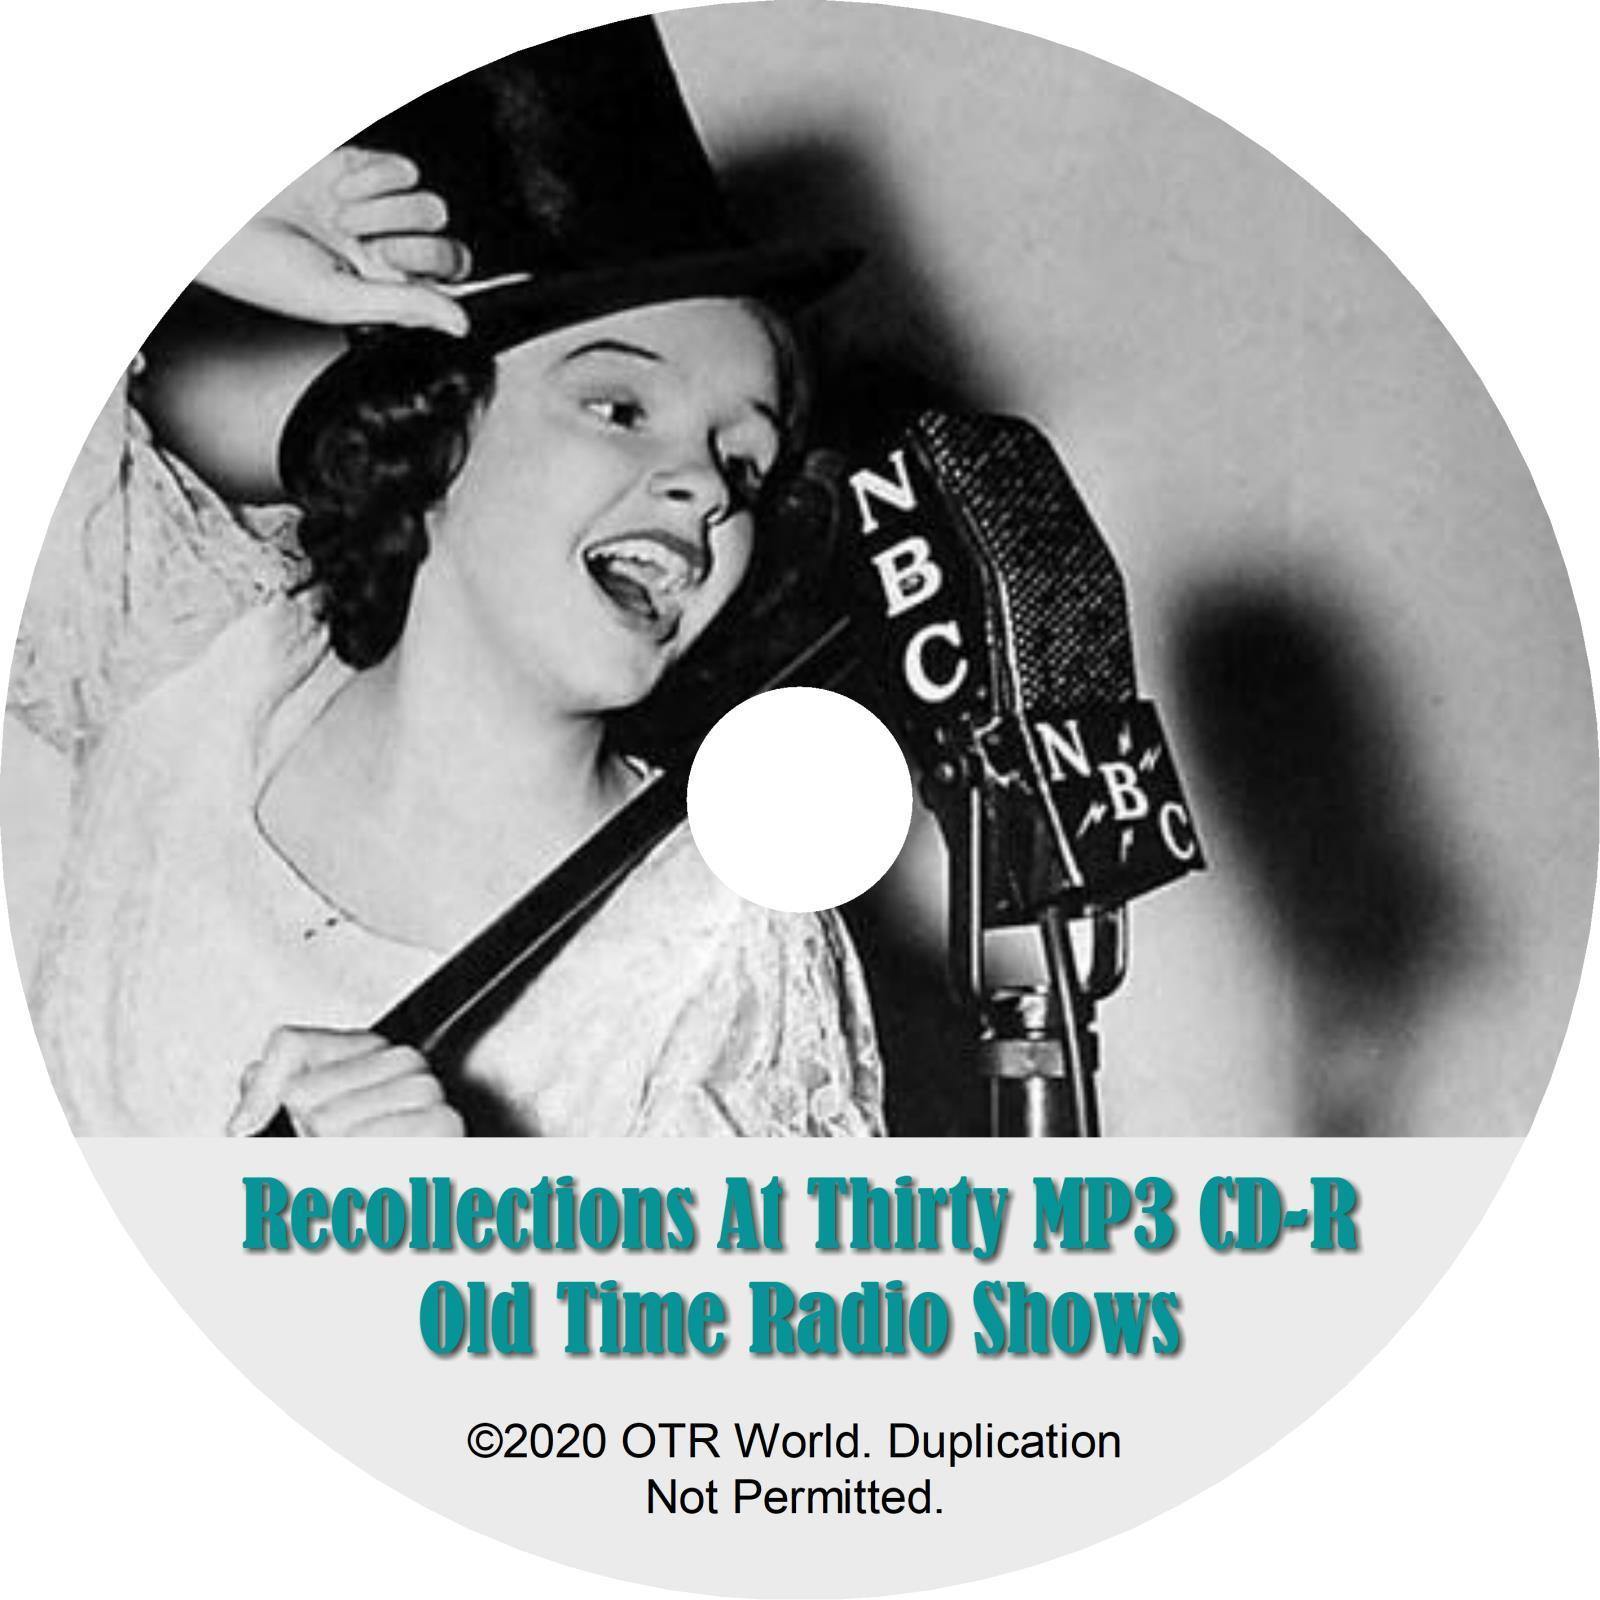 Recollections At Thirty OTR Old Time Radio Shows MP3 CD-R 41 Episodes - OTR World